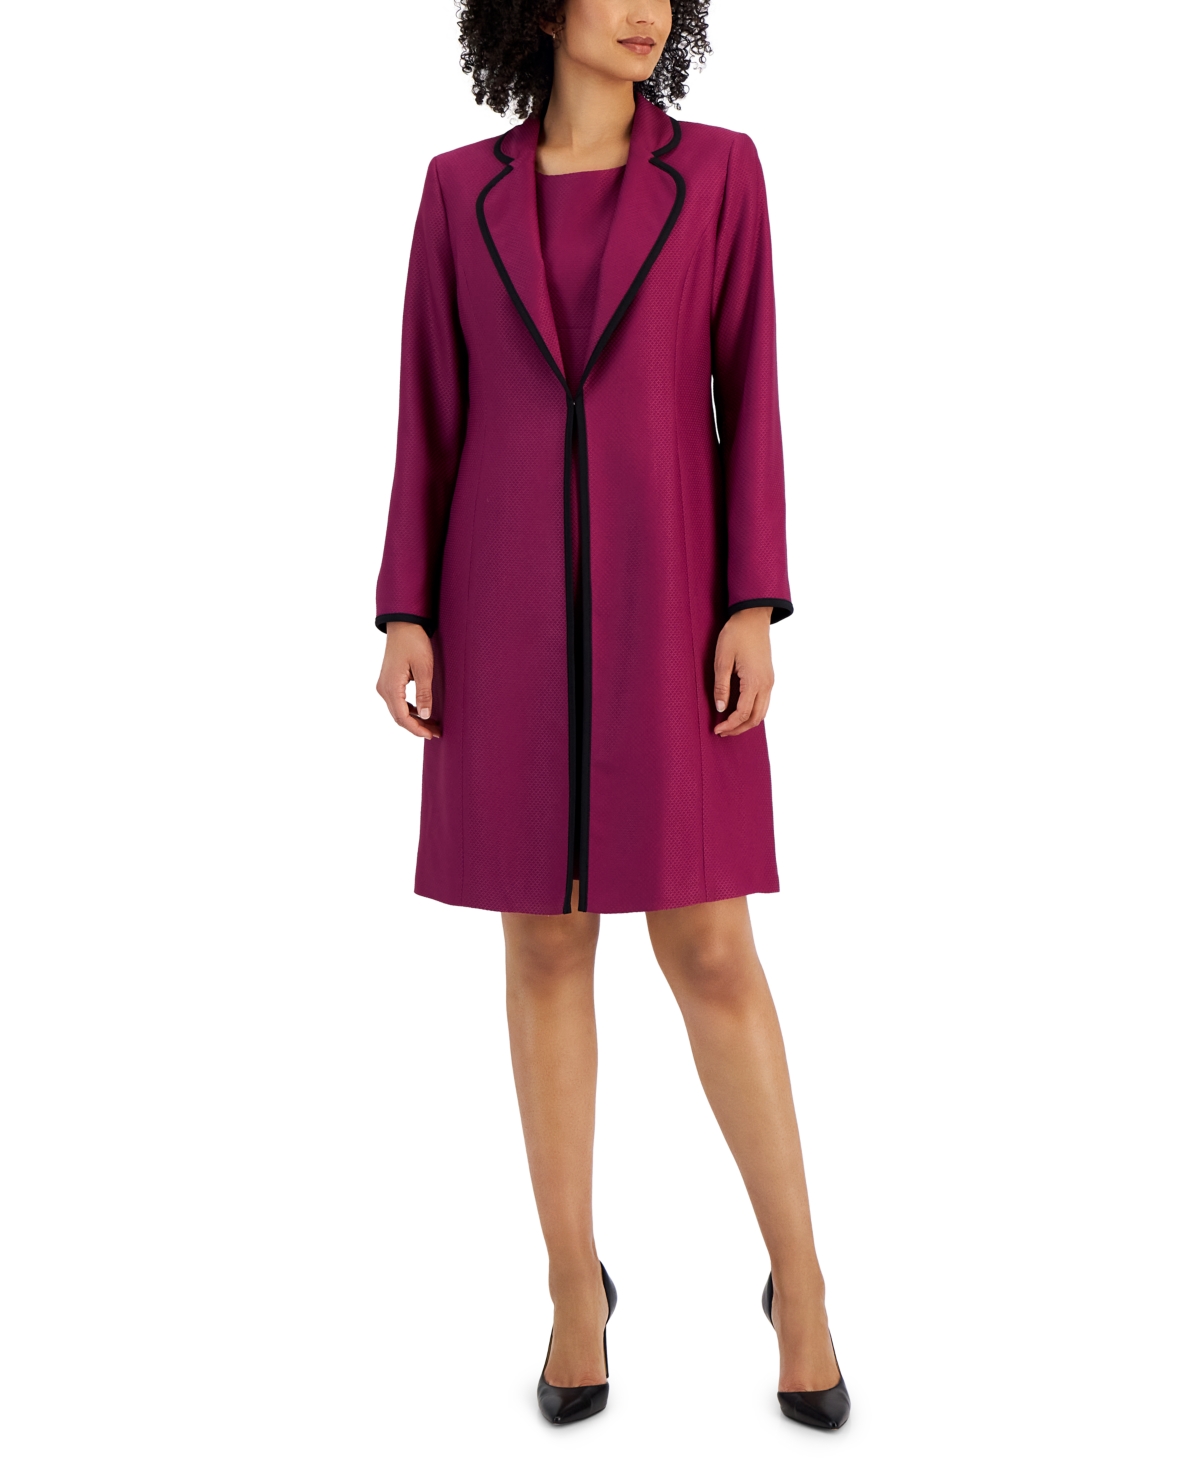 Le Suit Jacquard Framed Sheath Dress Suit, Available Regular And Petite Sizes In Wild Rose,black